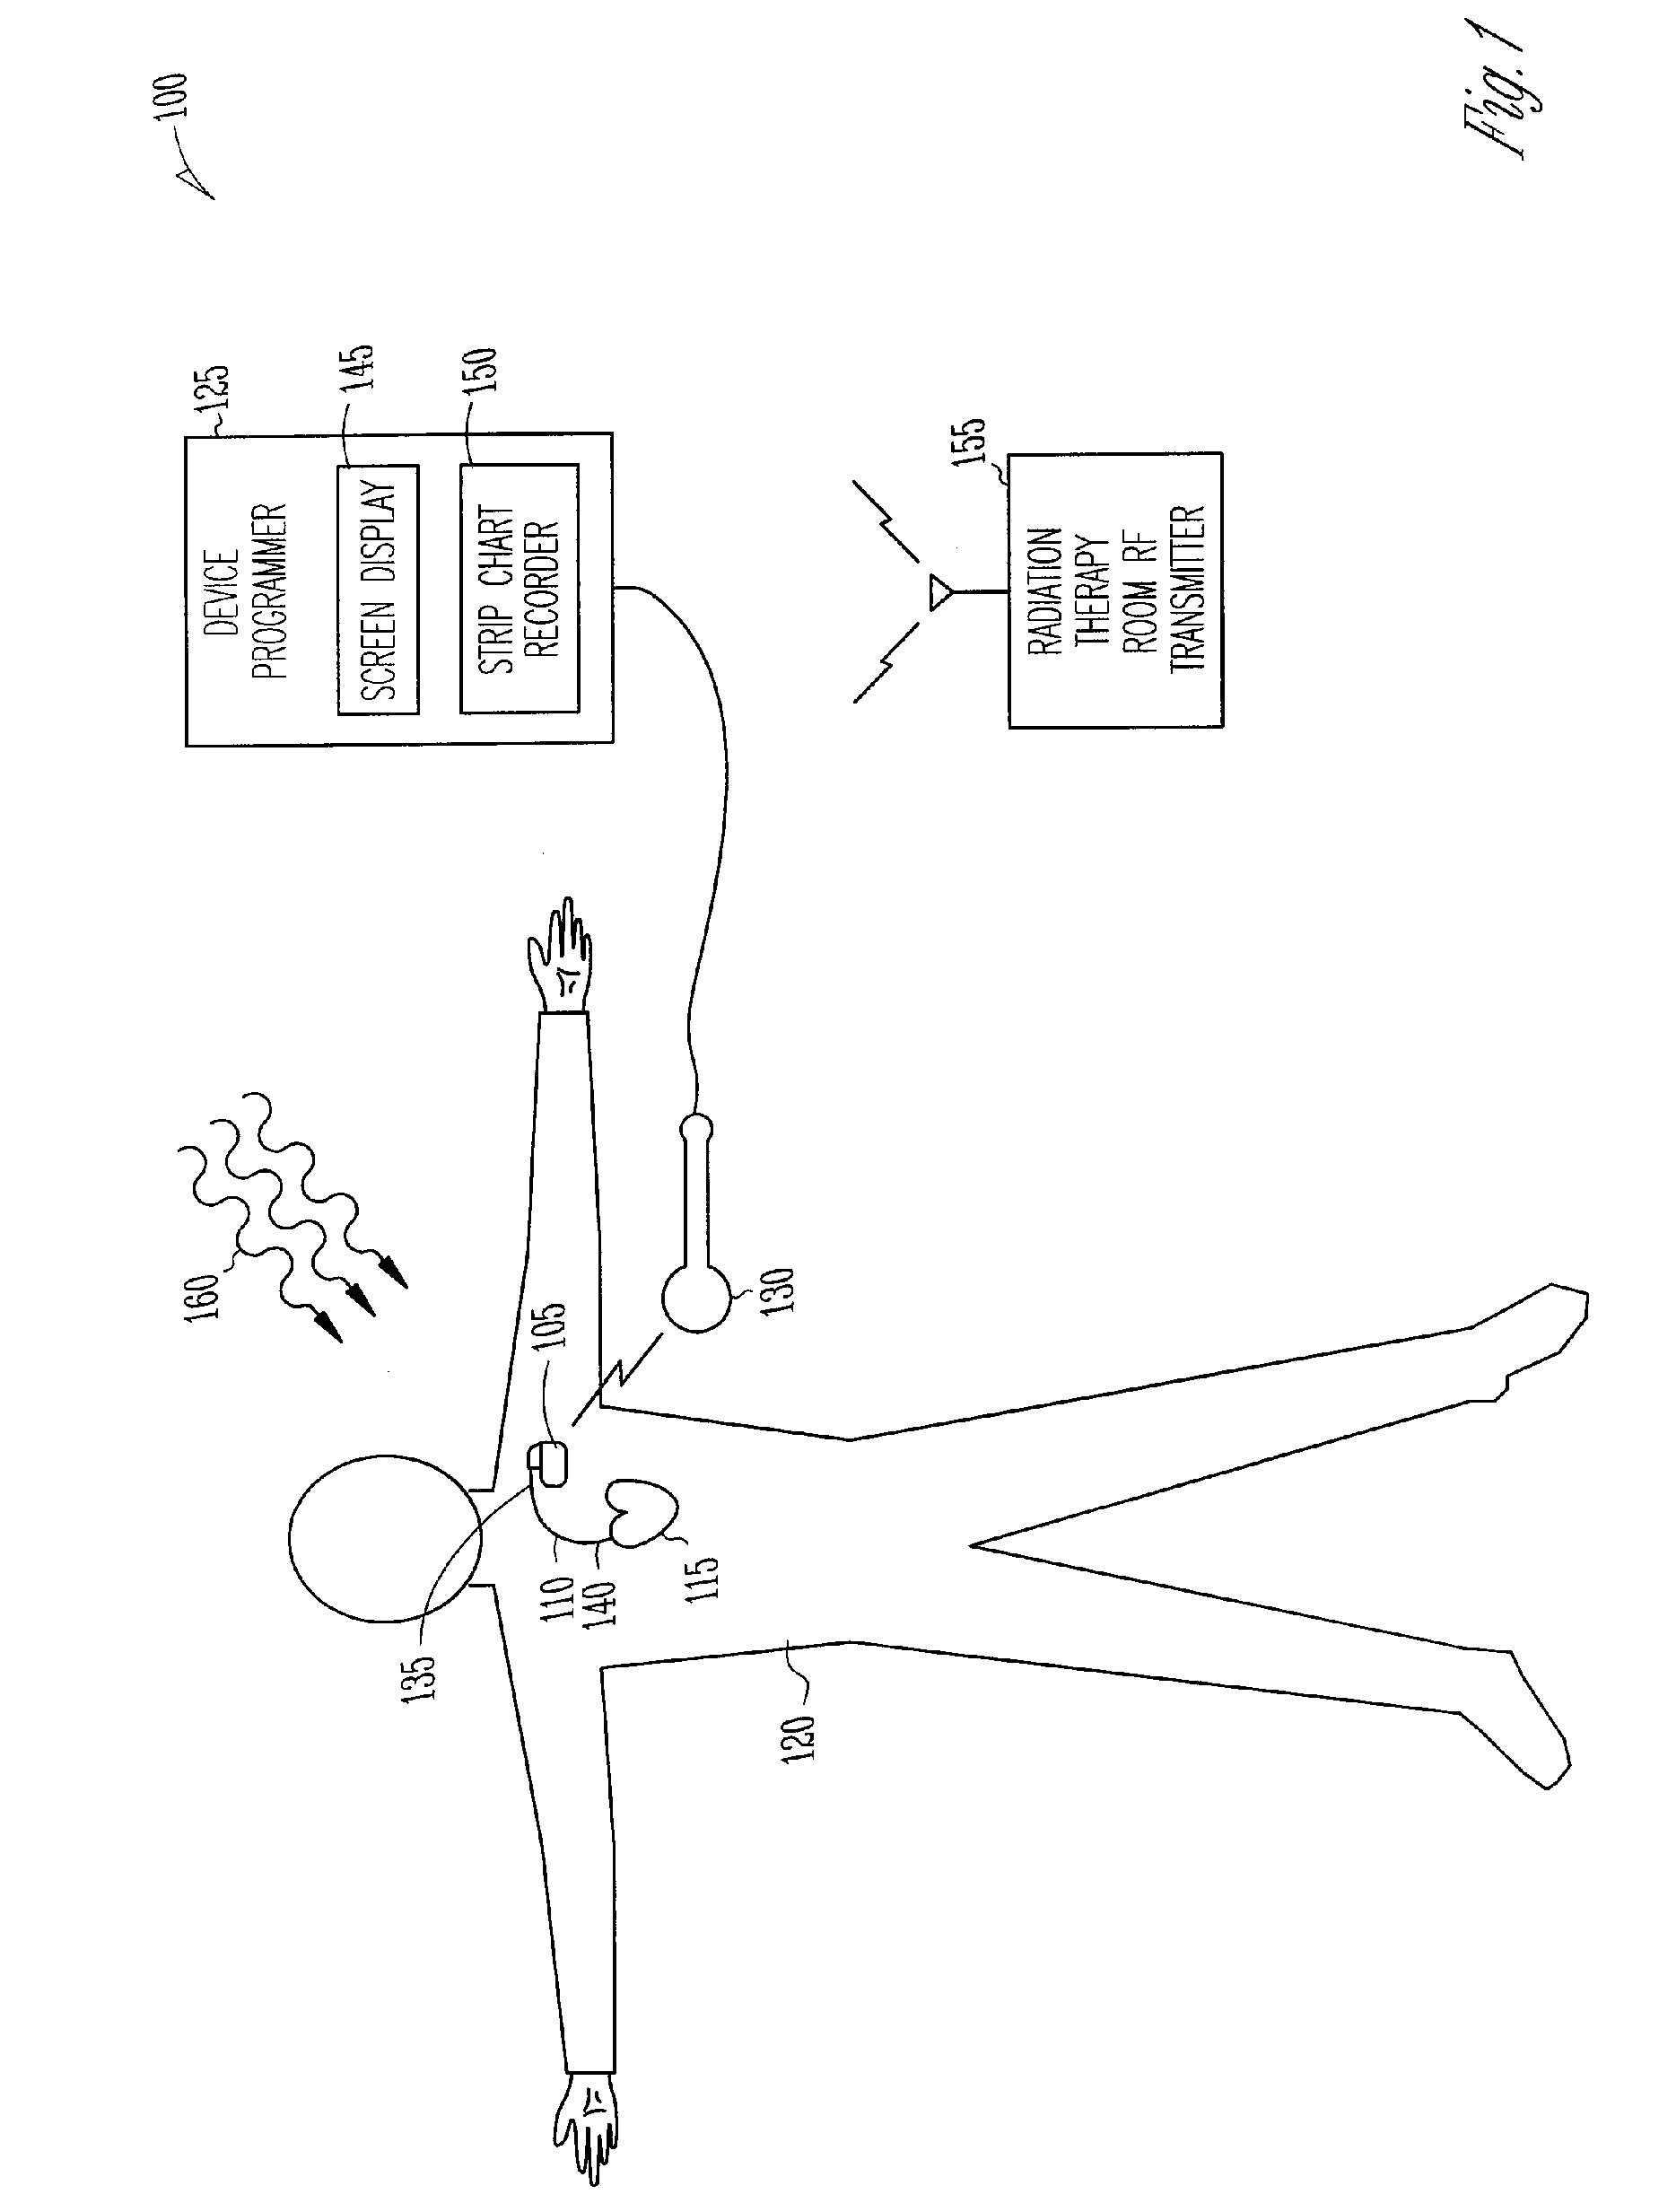 System and method for recovery from memory errors in a medical device